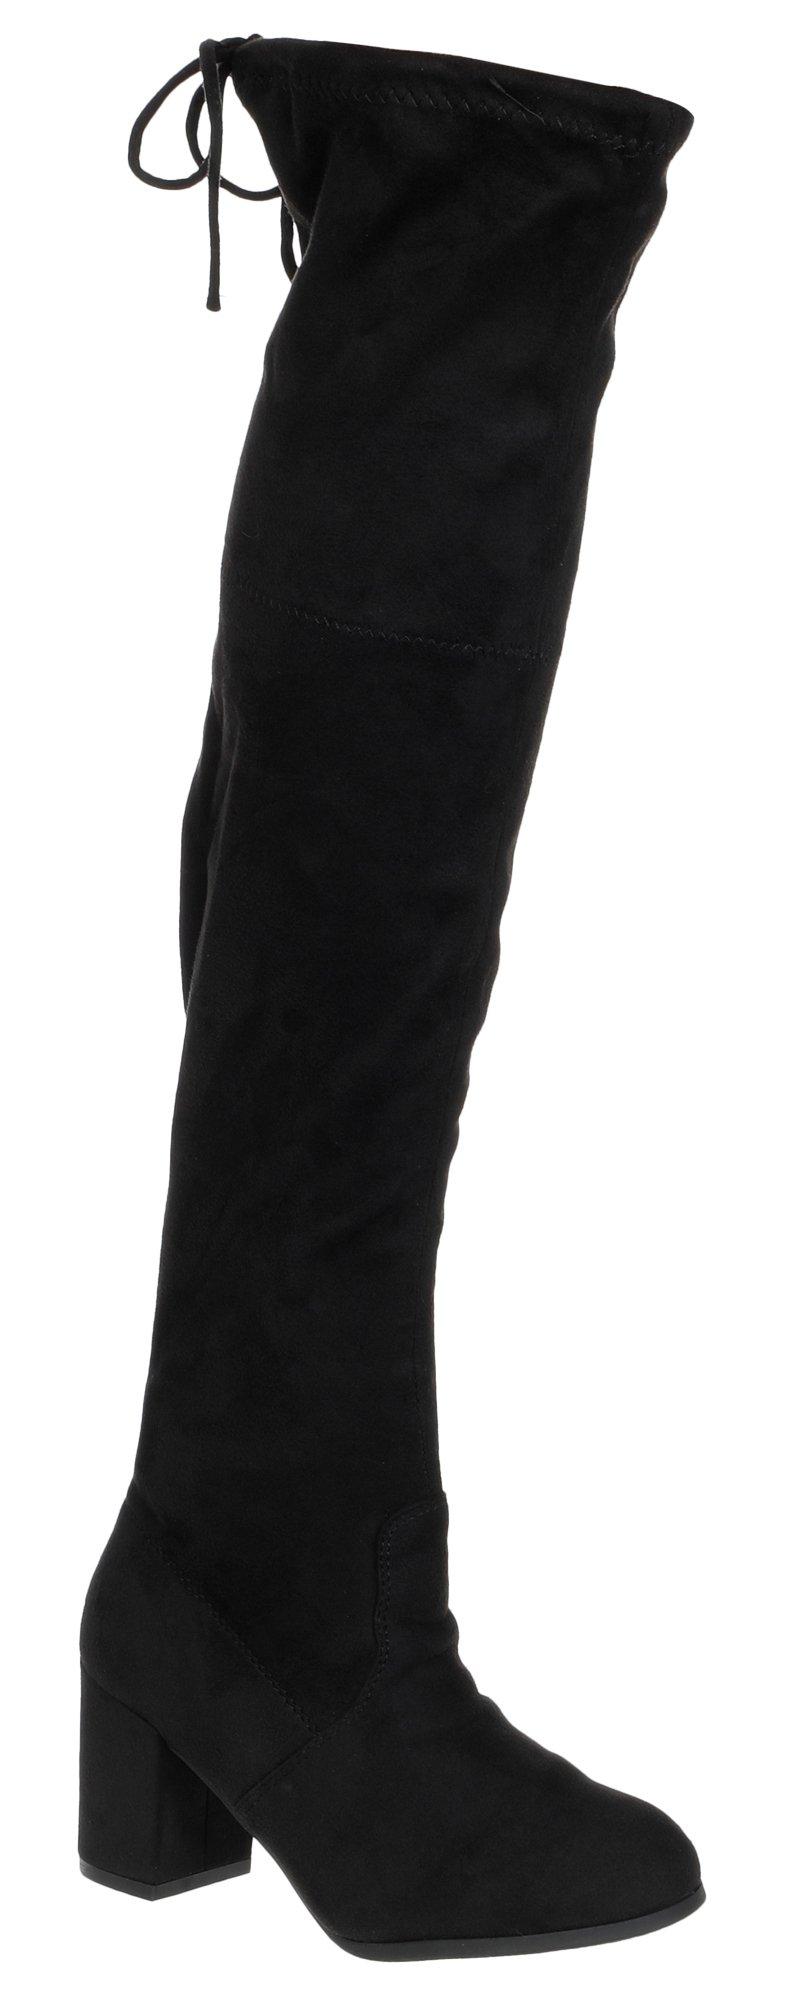 Women's Faux Leather Over the Knee Boots - Black